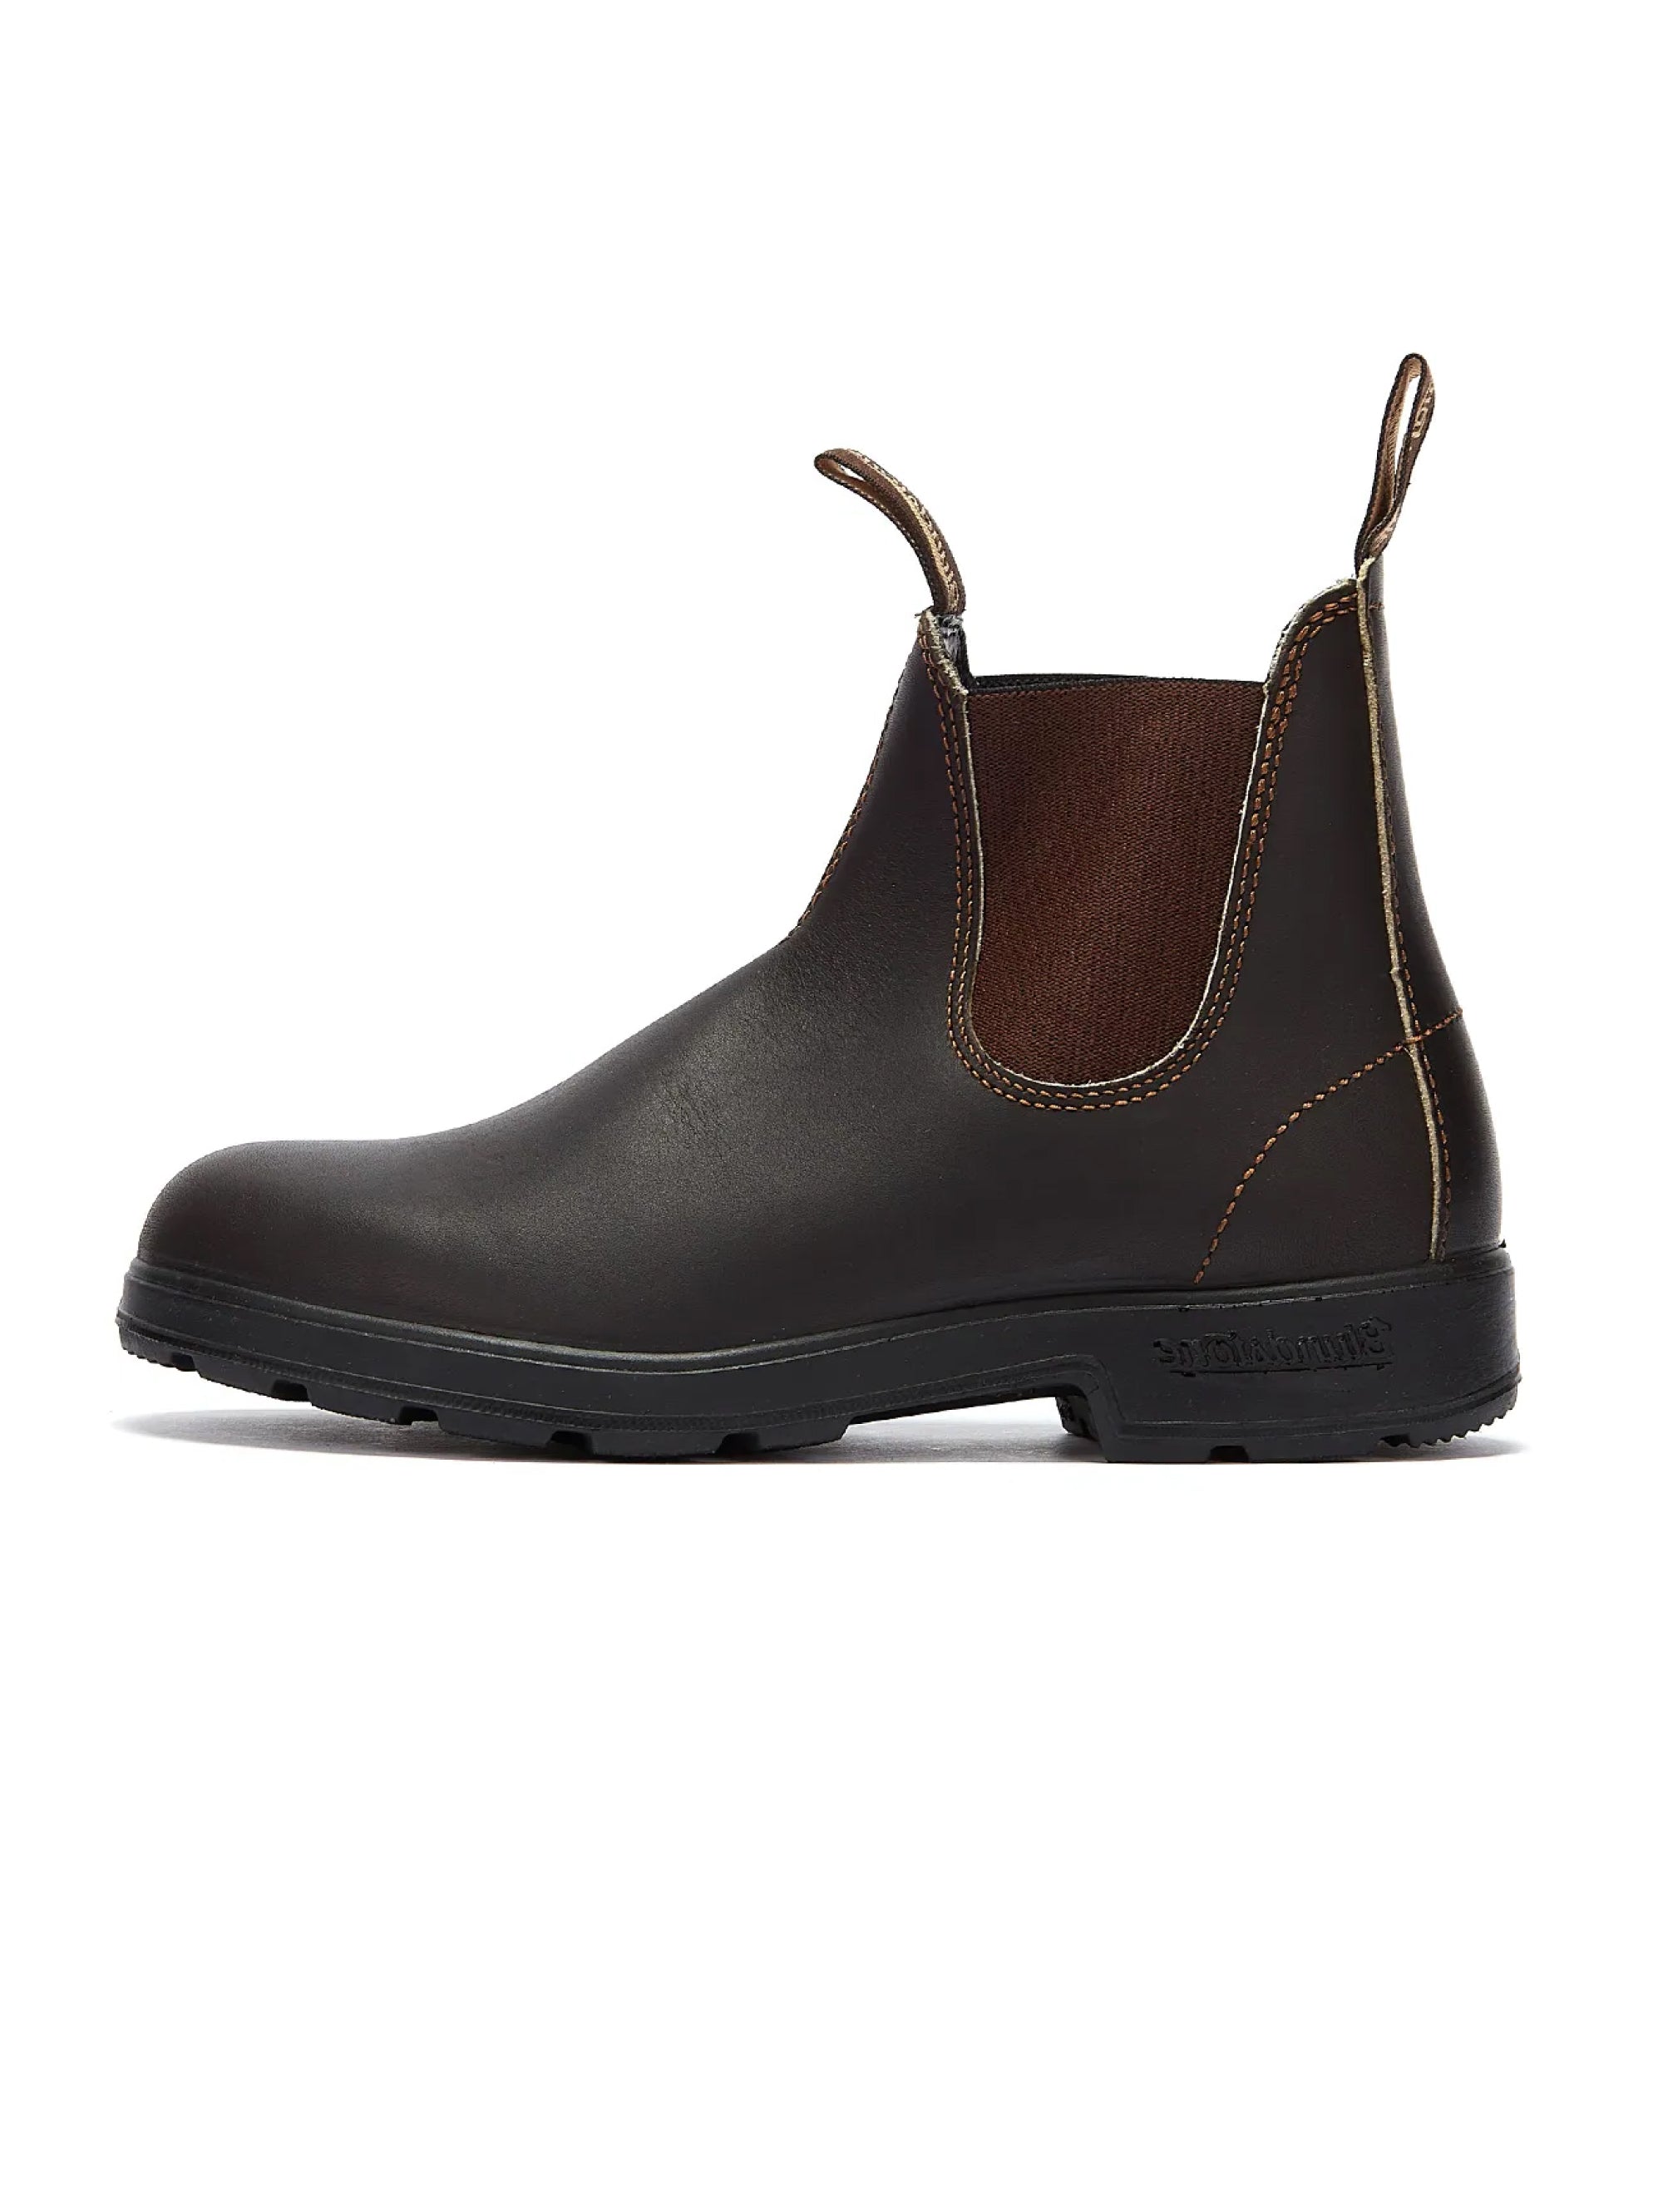 Dark Brown Leather Chelsea Boots with Elastics